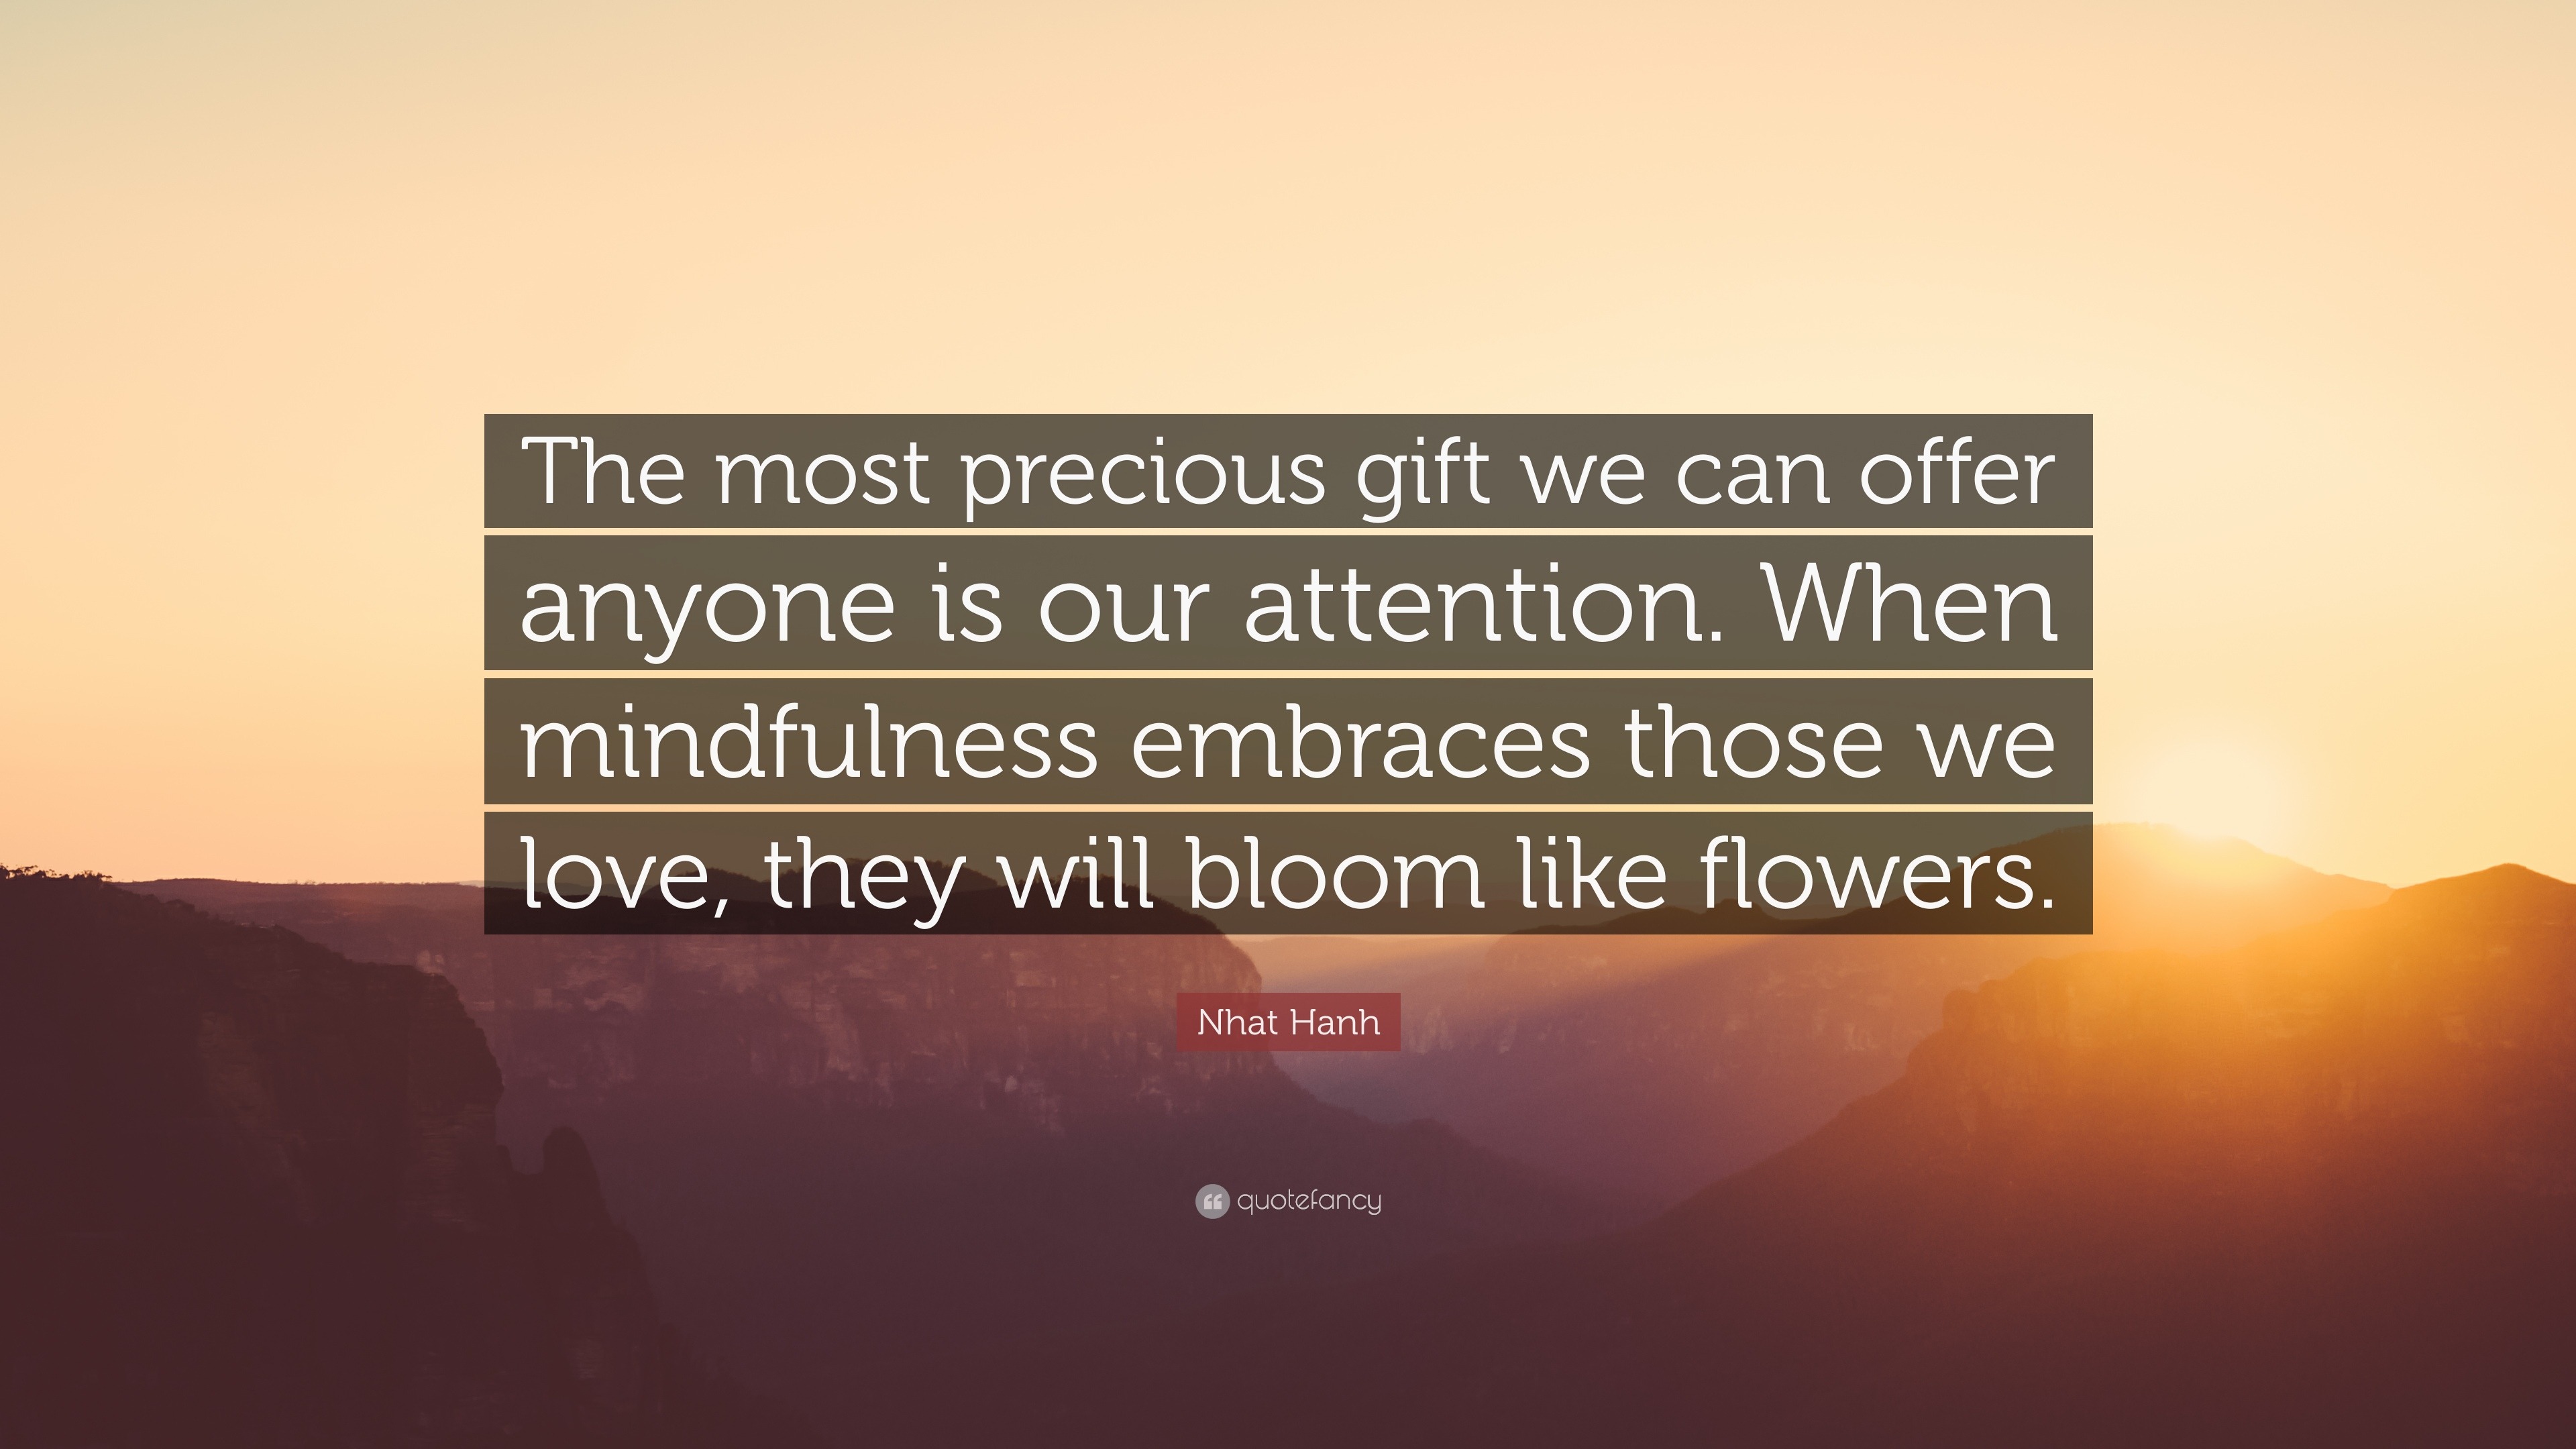 Nhat Hanh Quote: “The most precious gift we can offer anyone is our ...